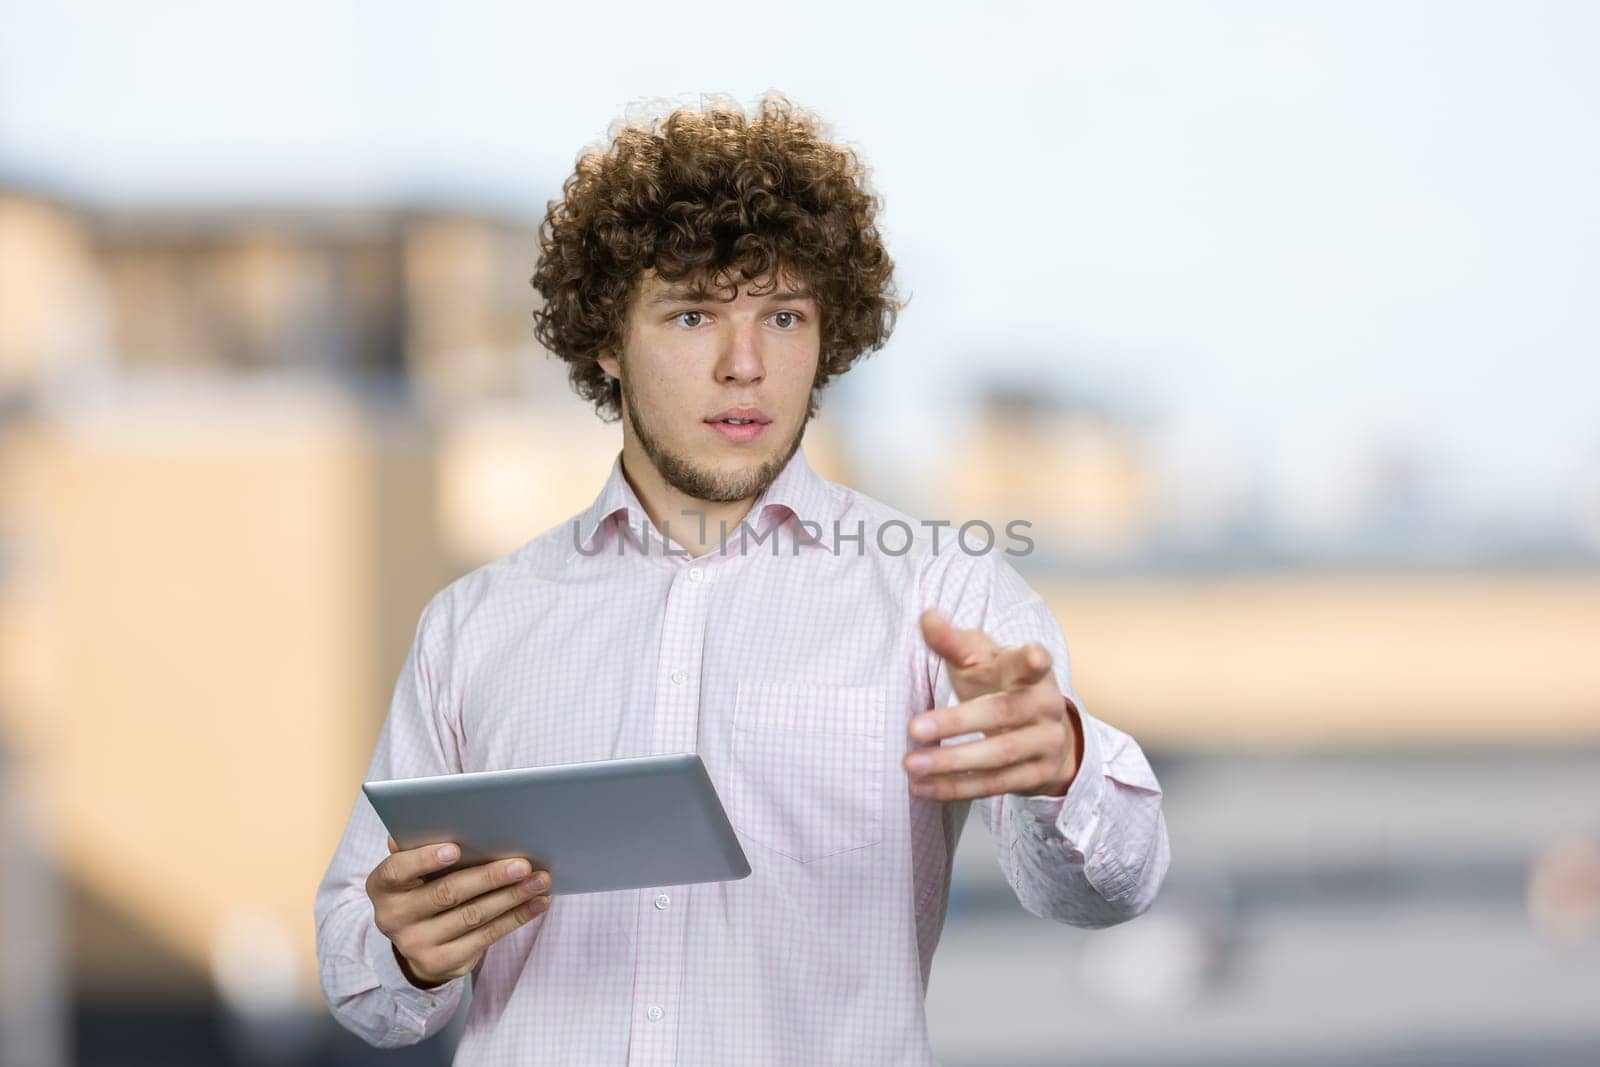 Portrait of a young man with curly hair holding a tablet pc and pointing at something. Blurred urban background.